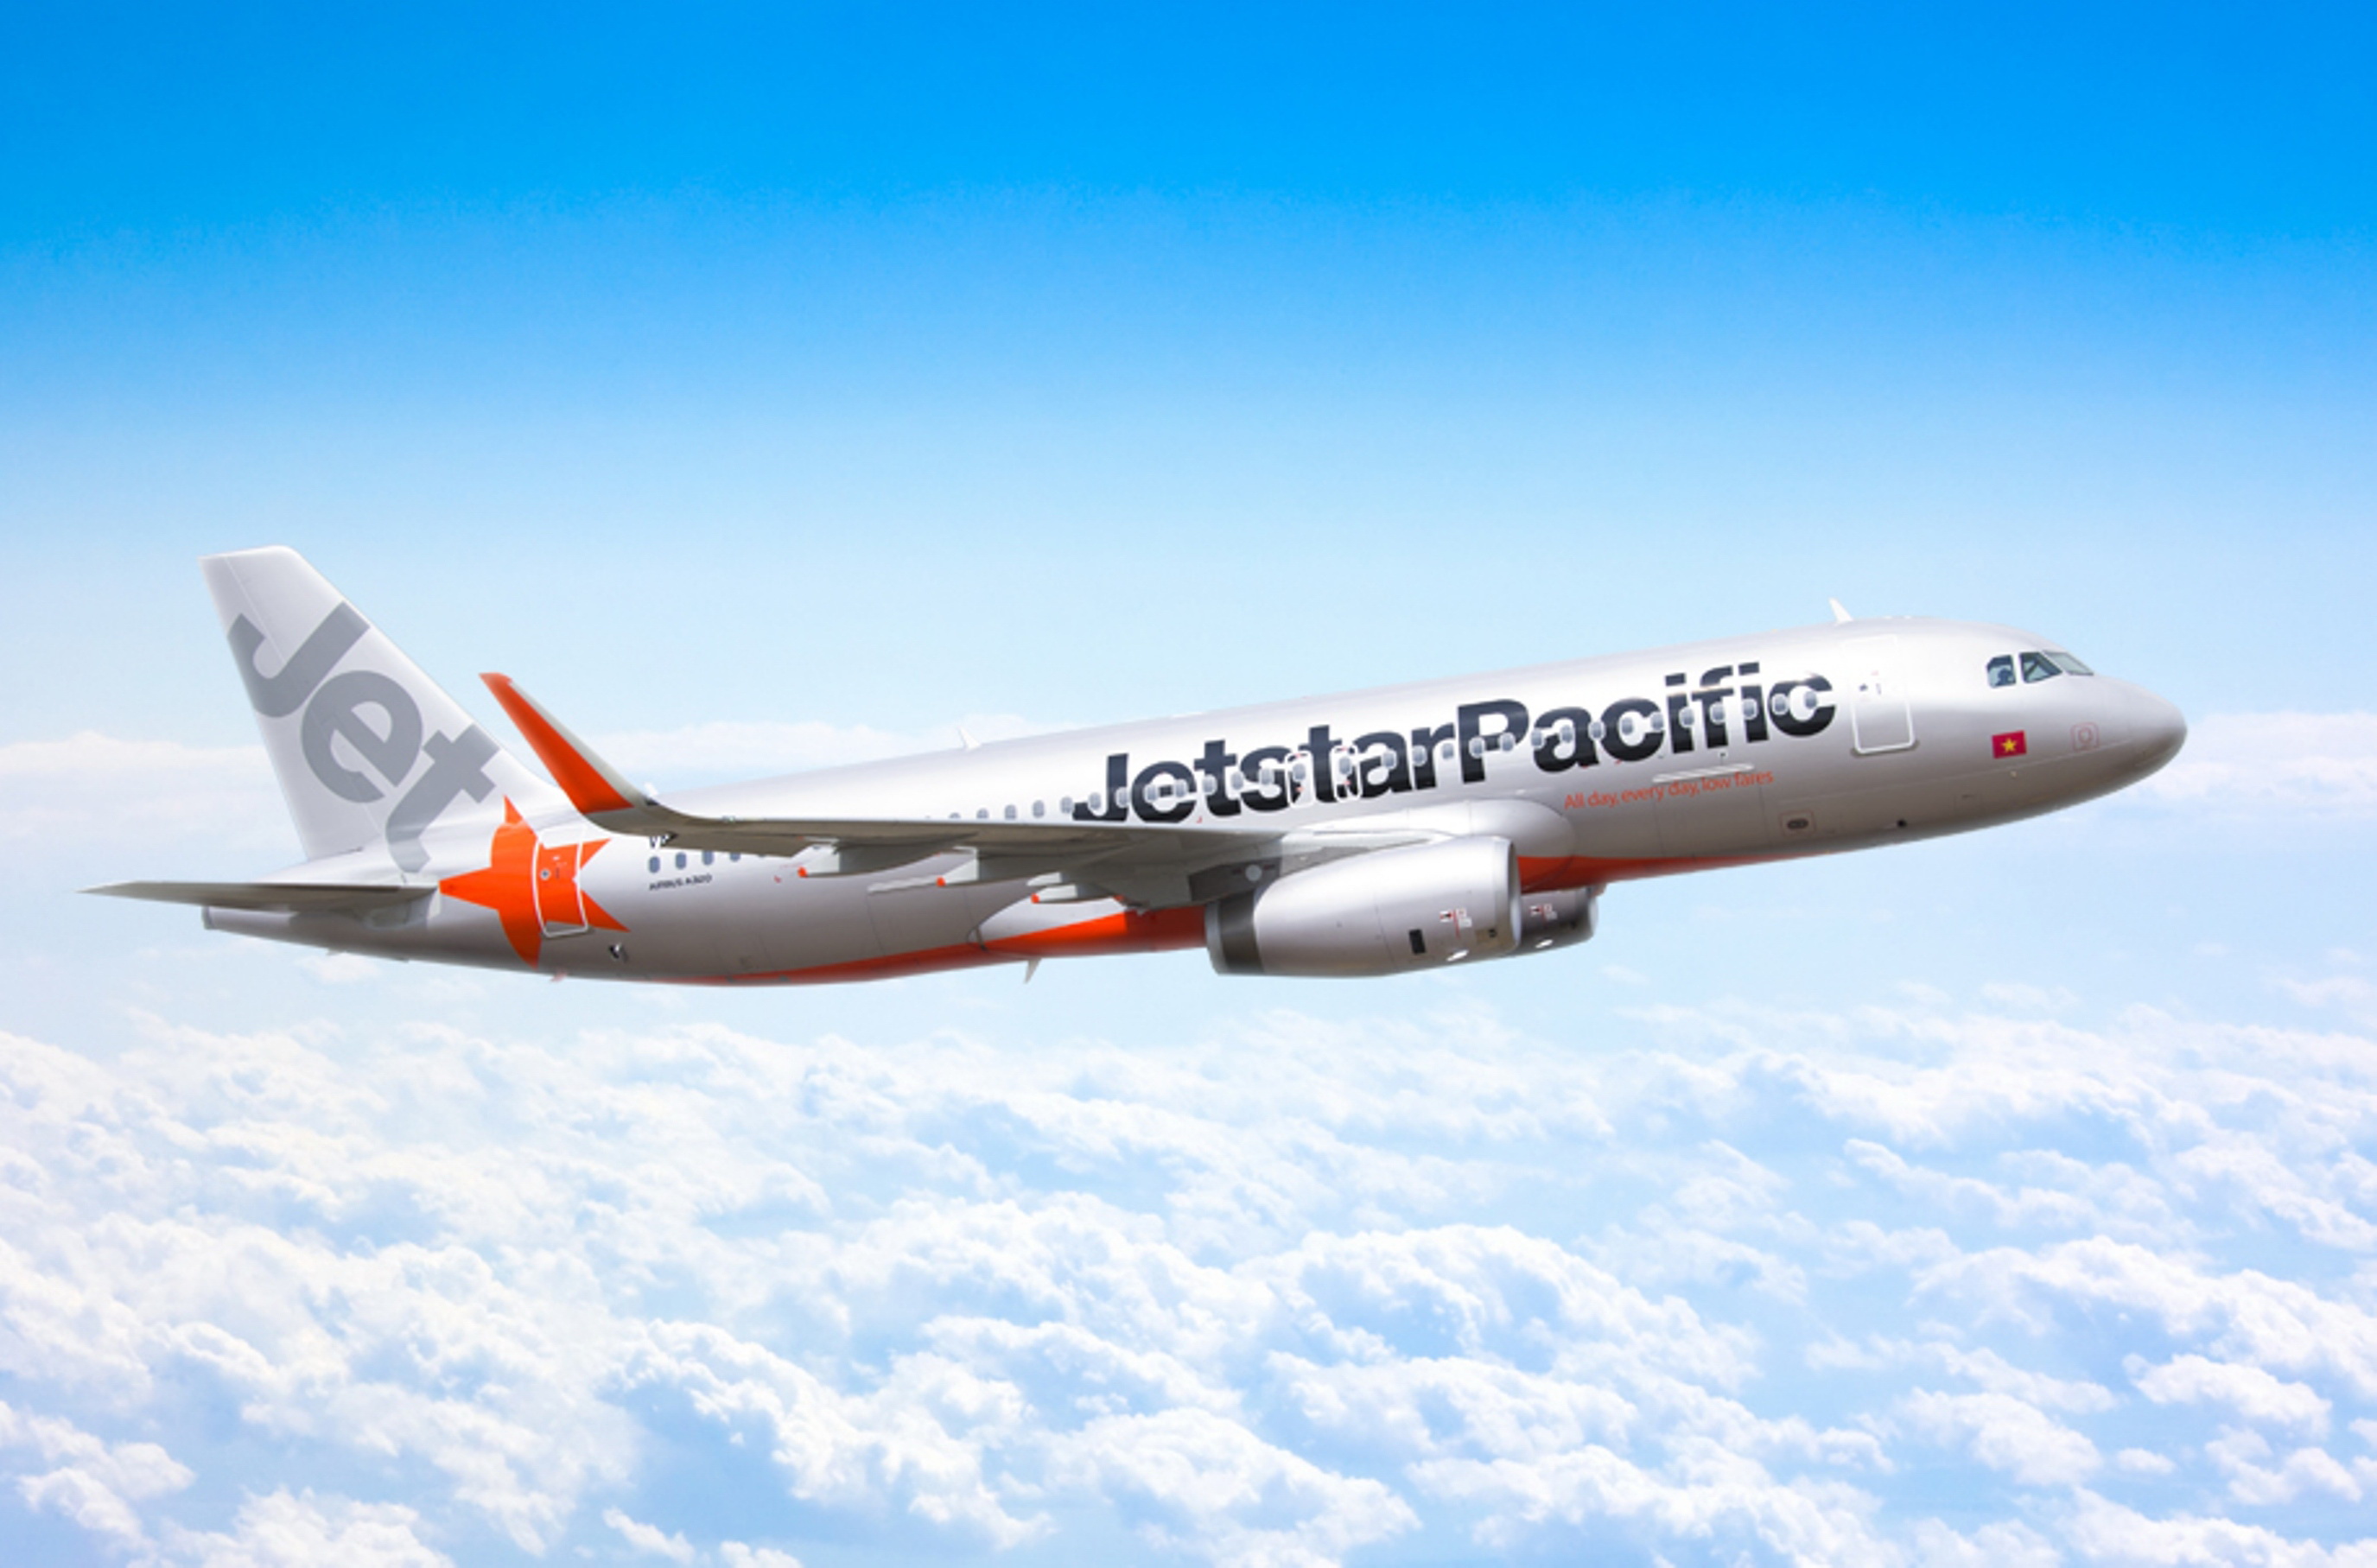 Jetstar sees changes to flights as Singapore airport fees rise